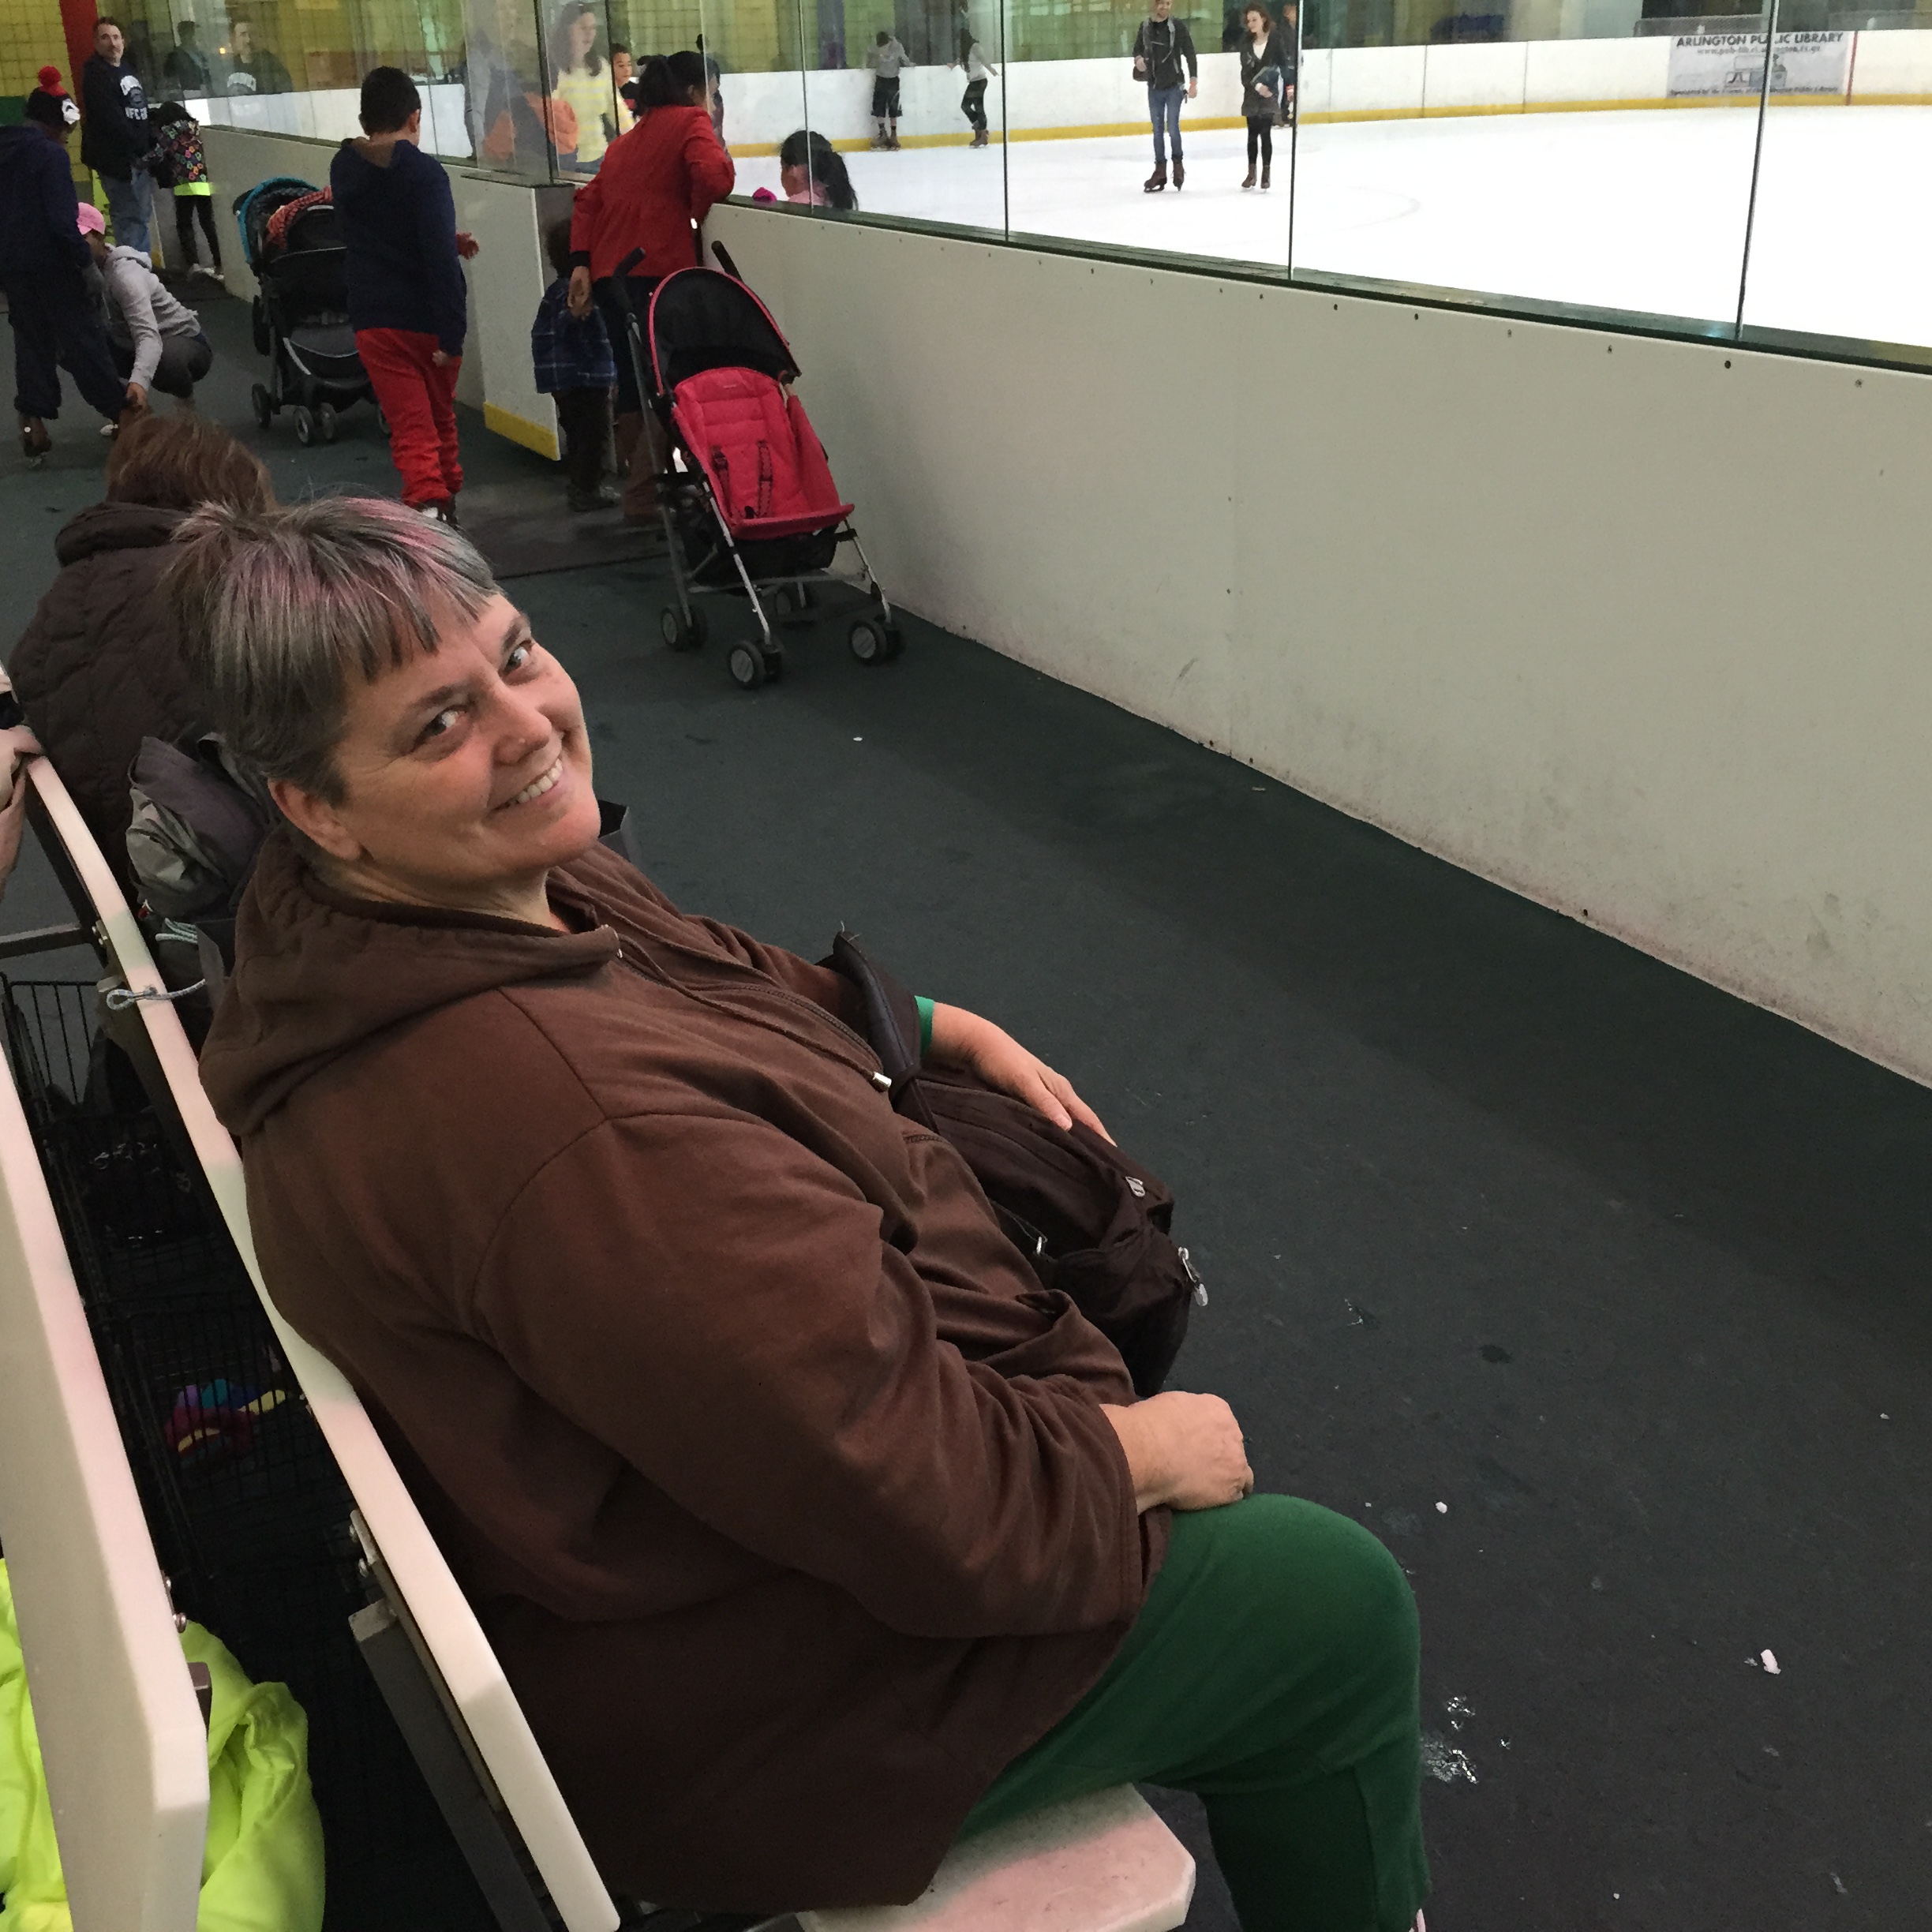 Mom chilling on the bench while waiting for me to finish skating